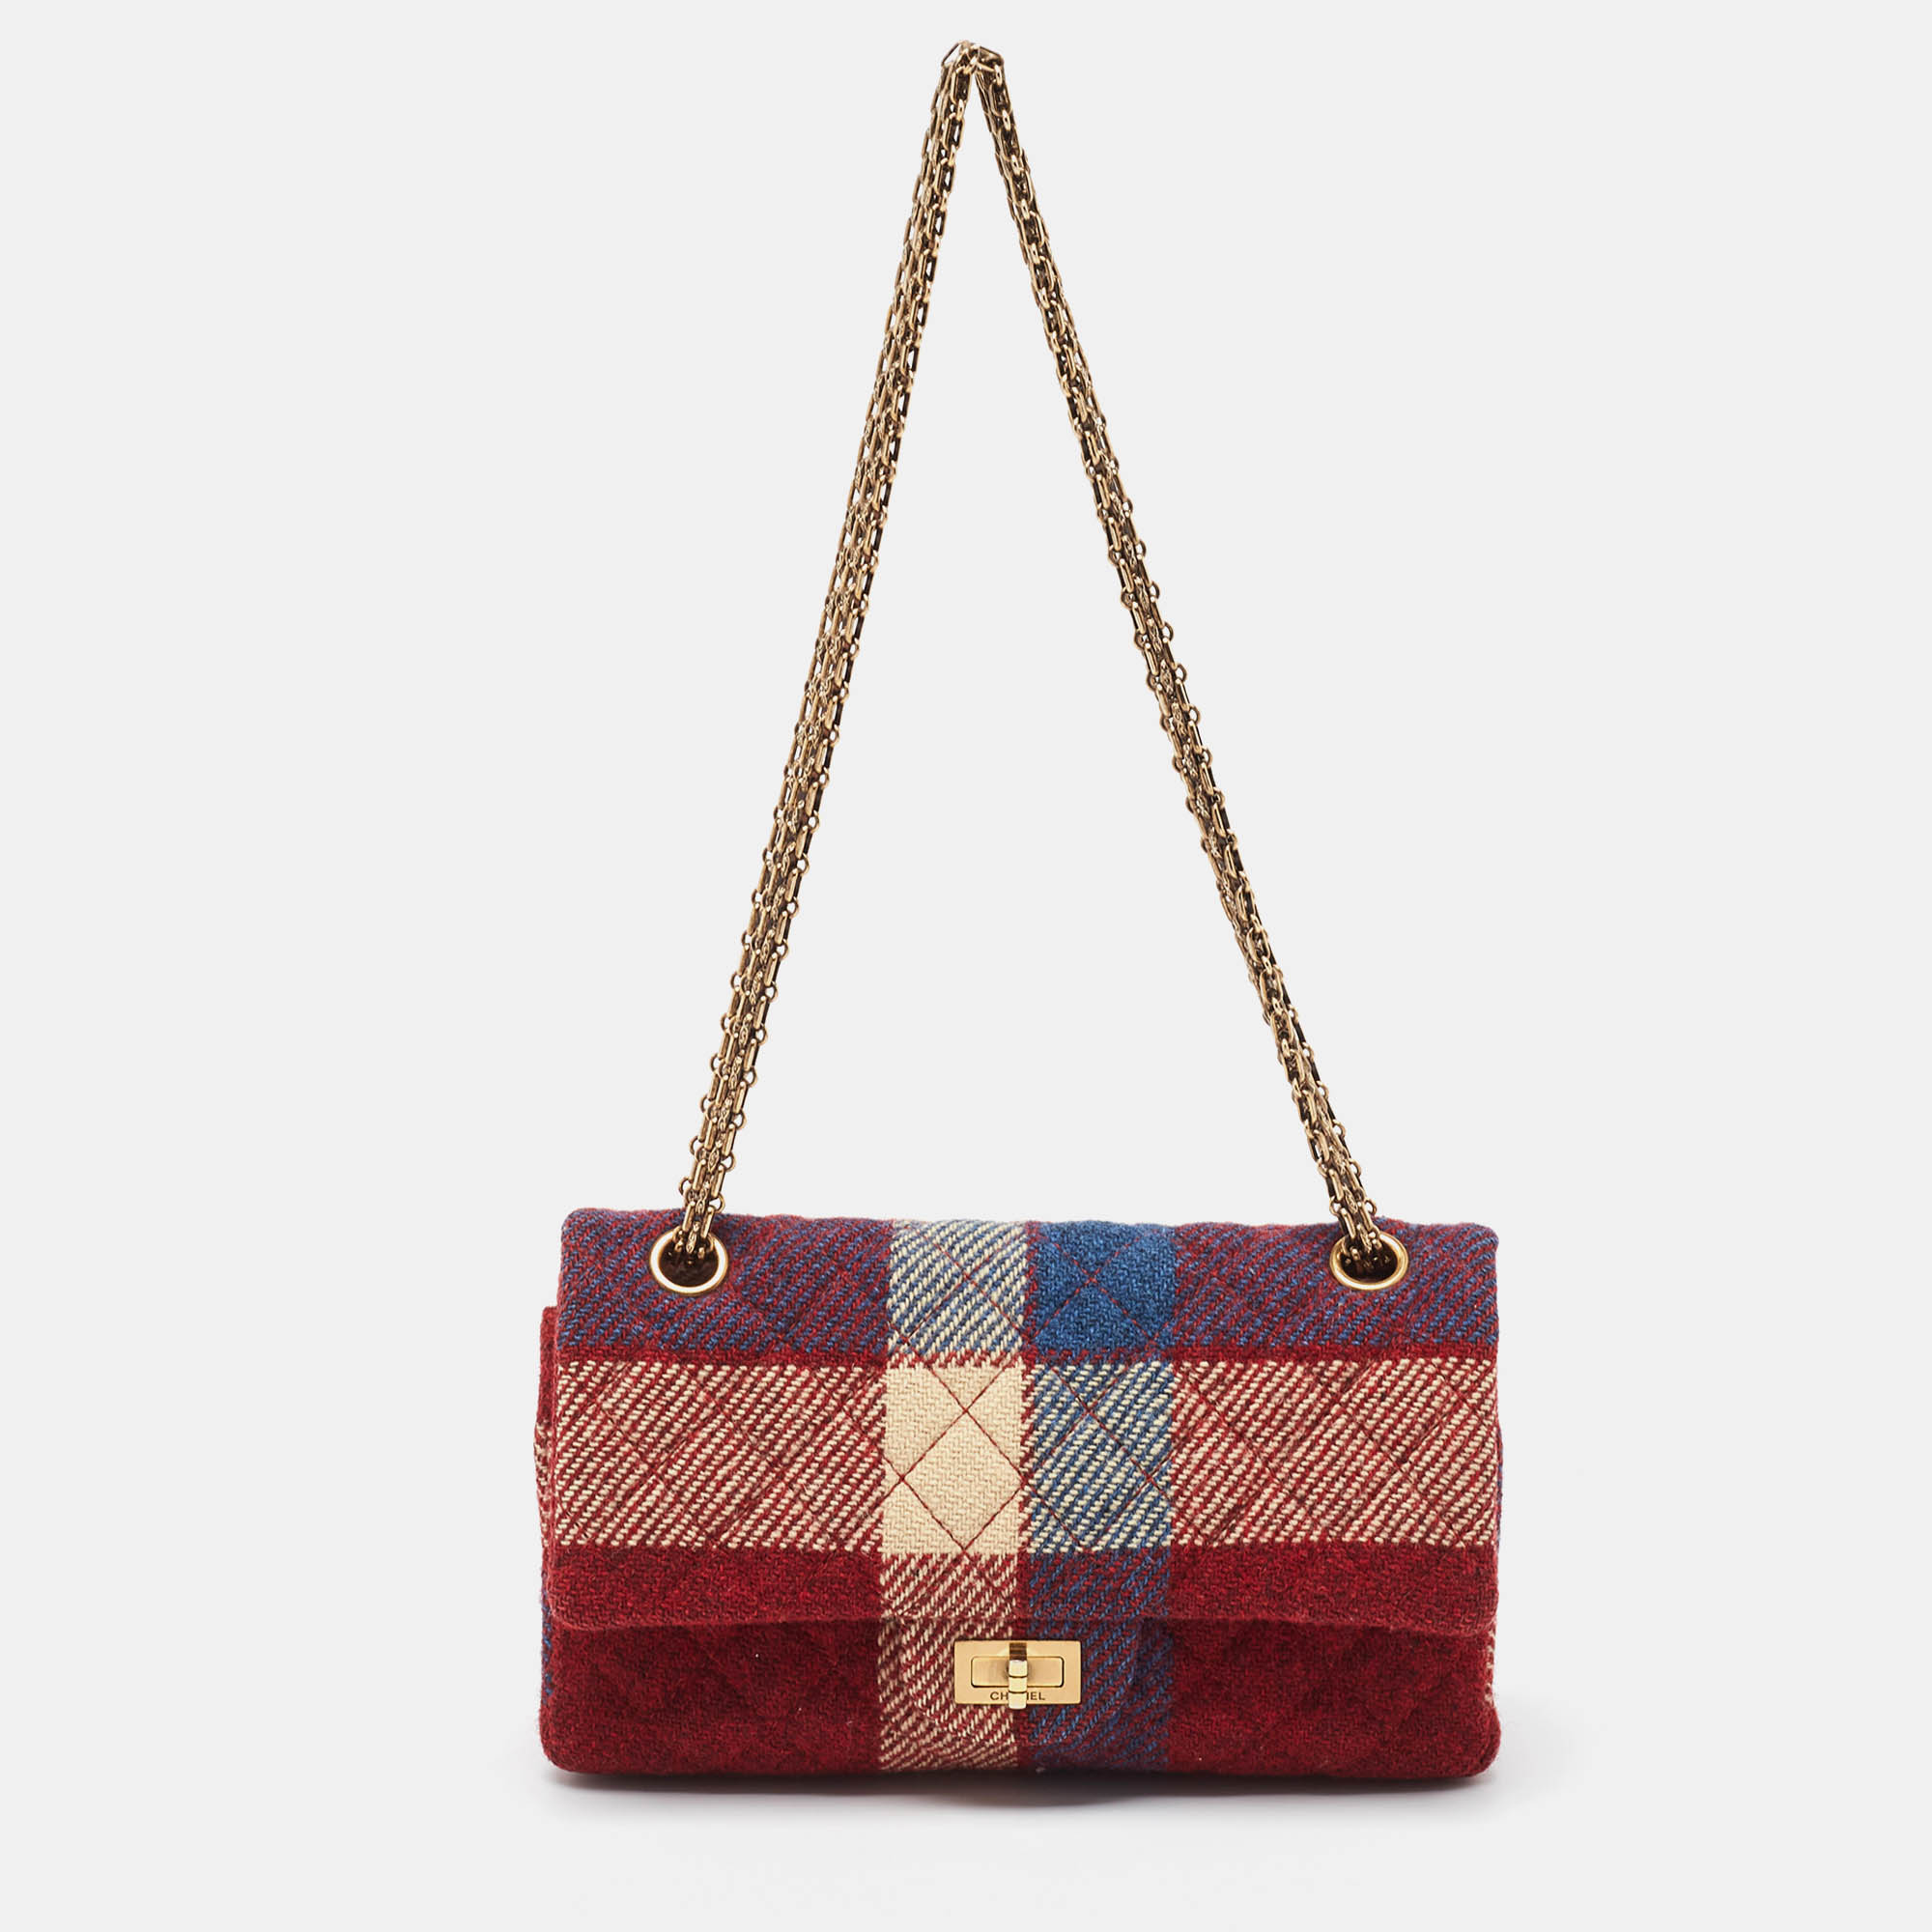 Chanel red gingham tweed classic 225 reissue 2.55 flap bag